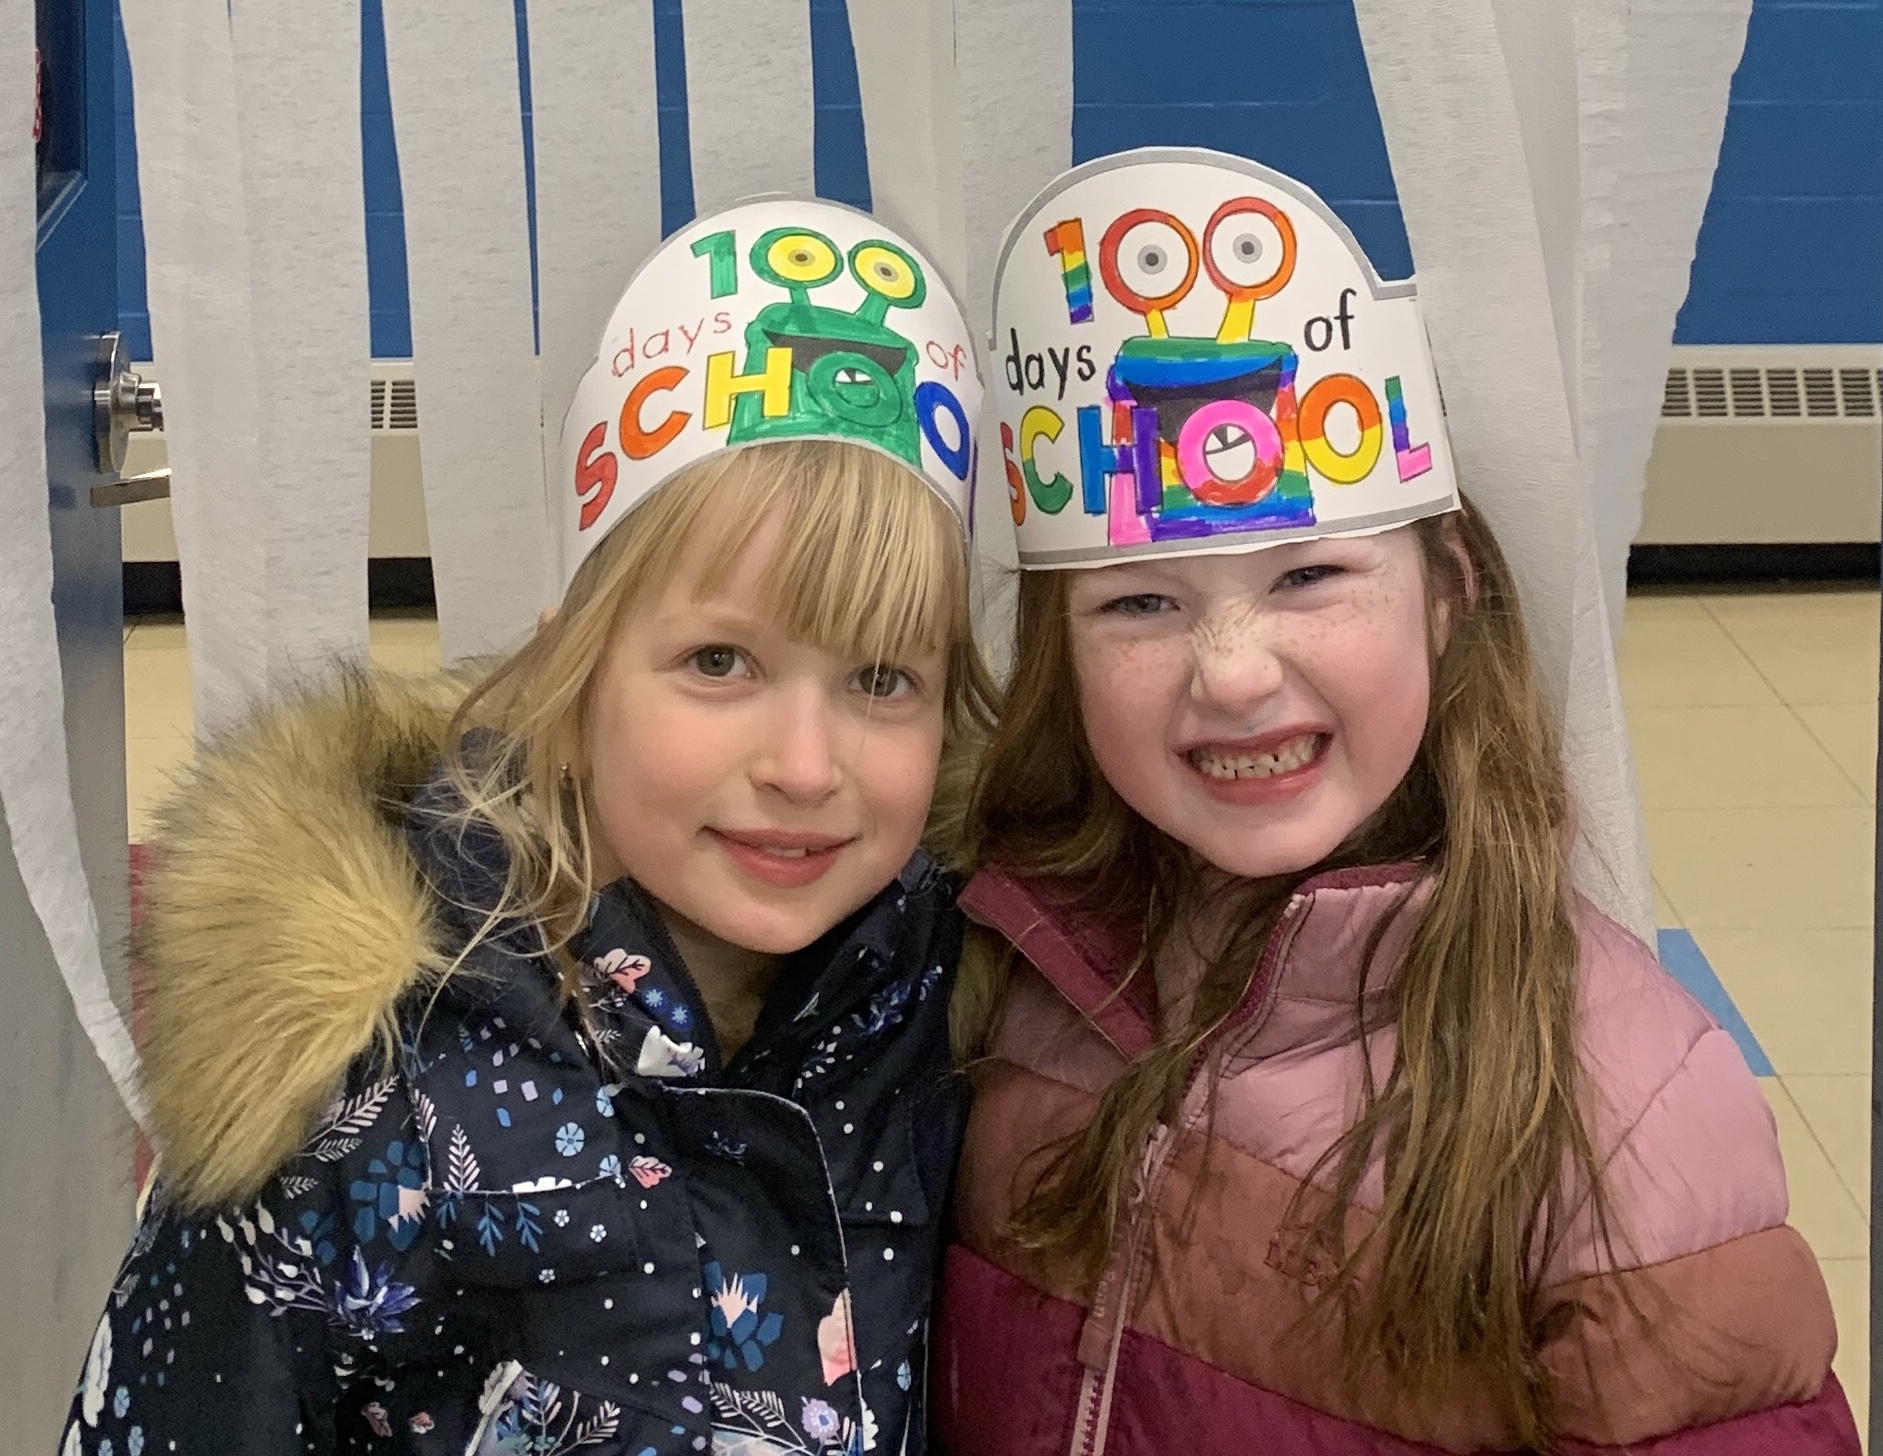 Students smile while wearing 100 day hats